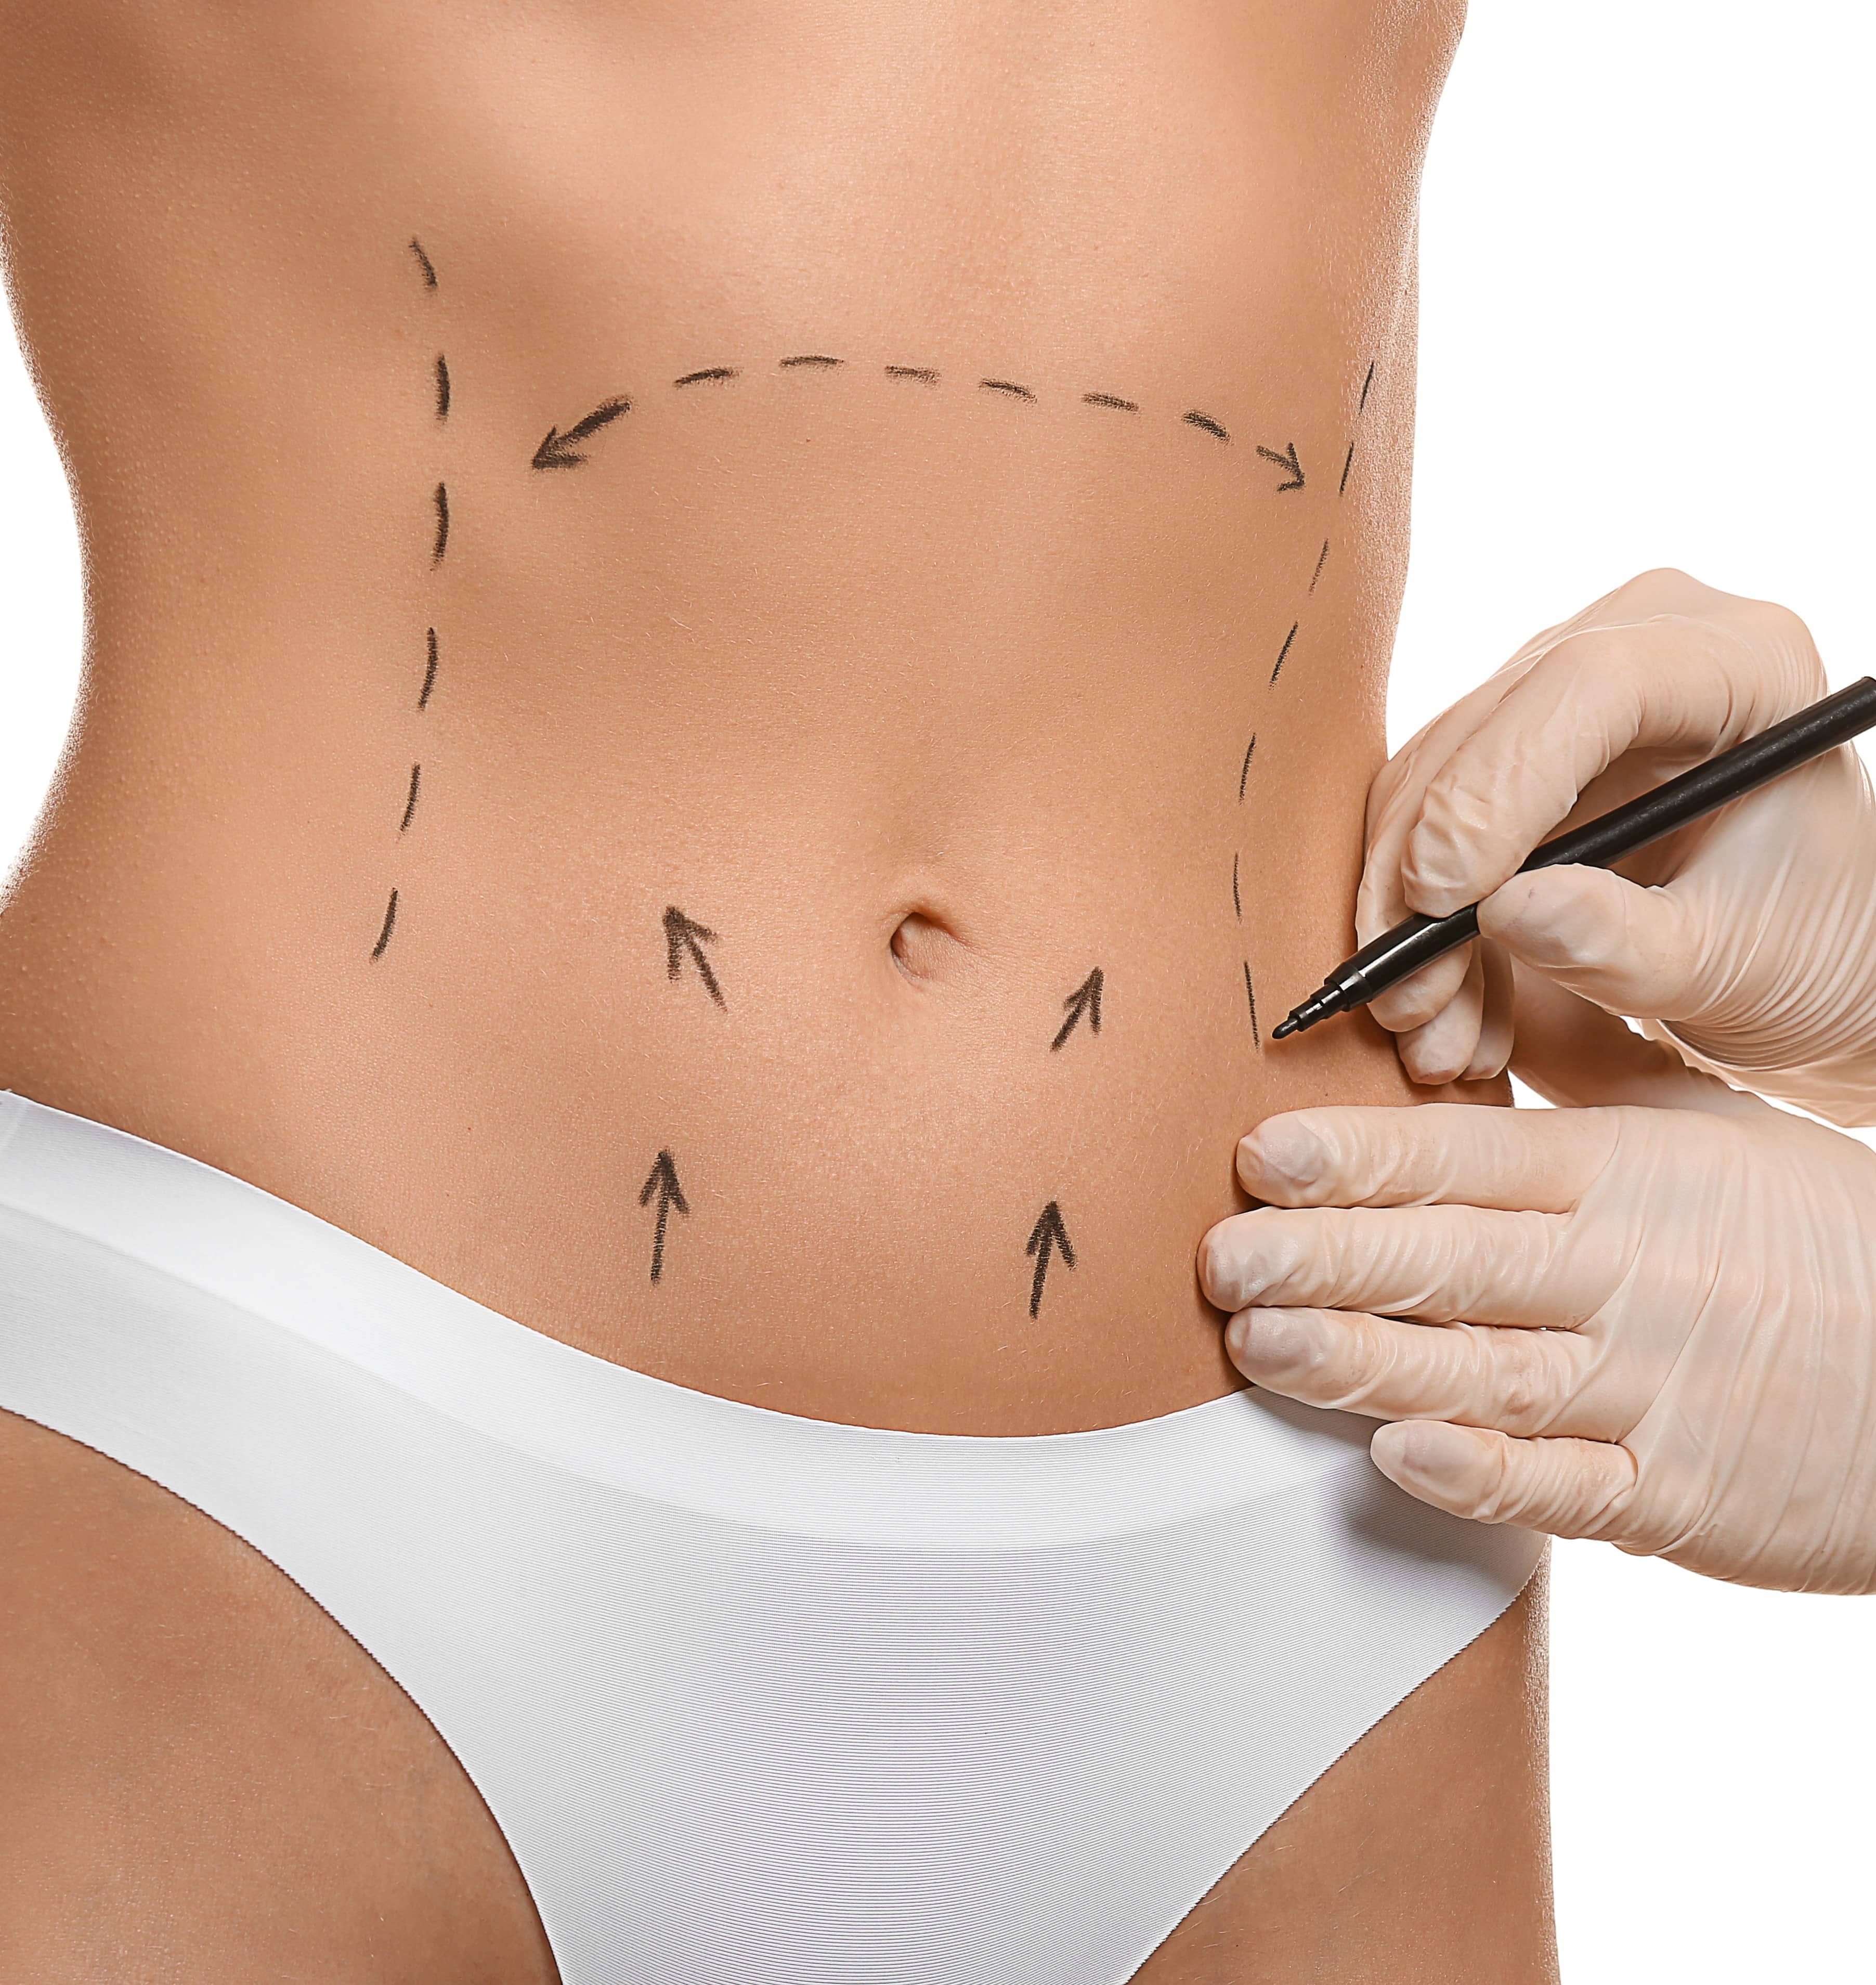 The Difference Between a Panniculectomy and a Tummy Tuck